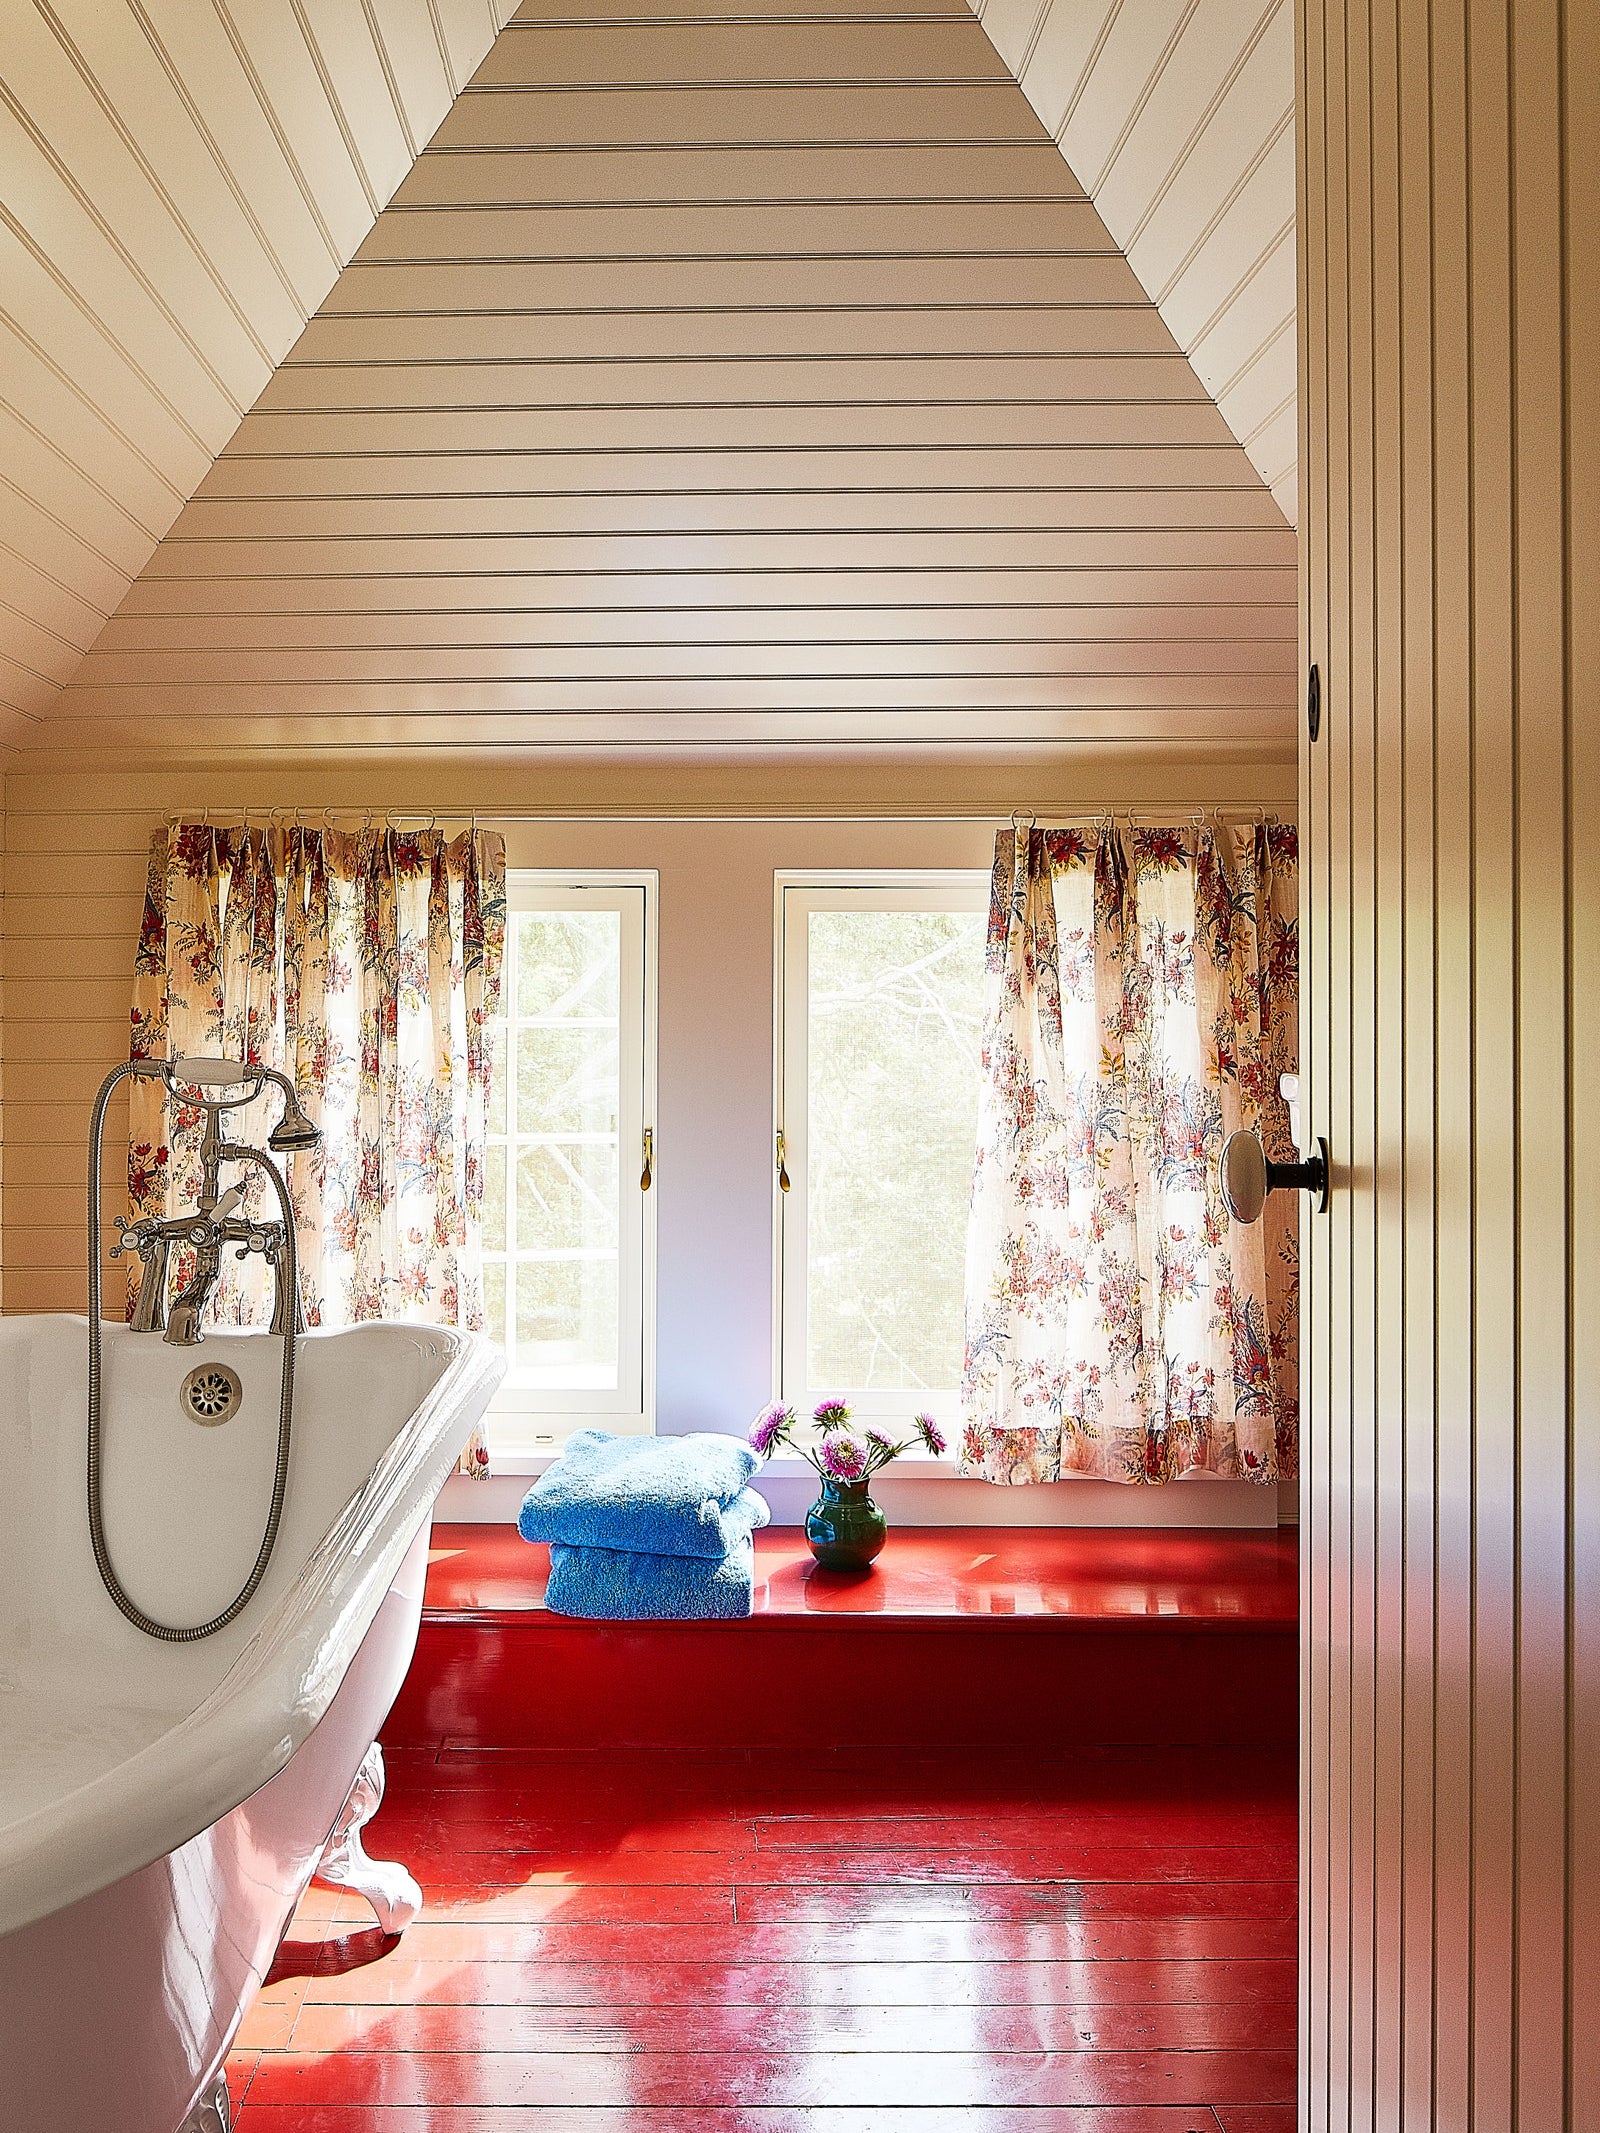 Country bathroom with red painted floors